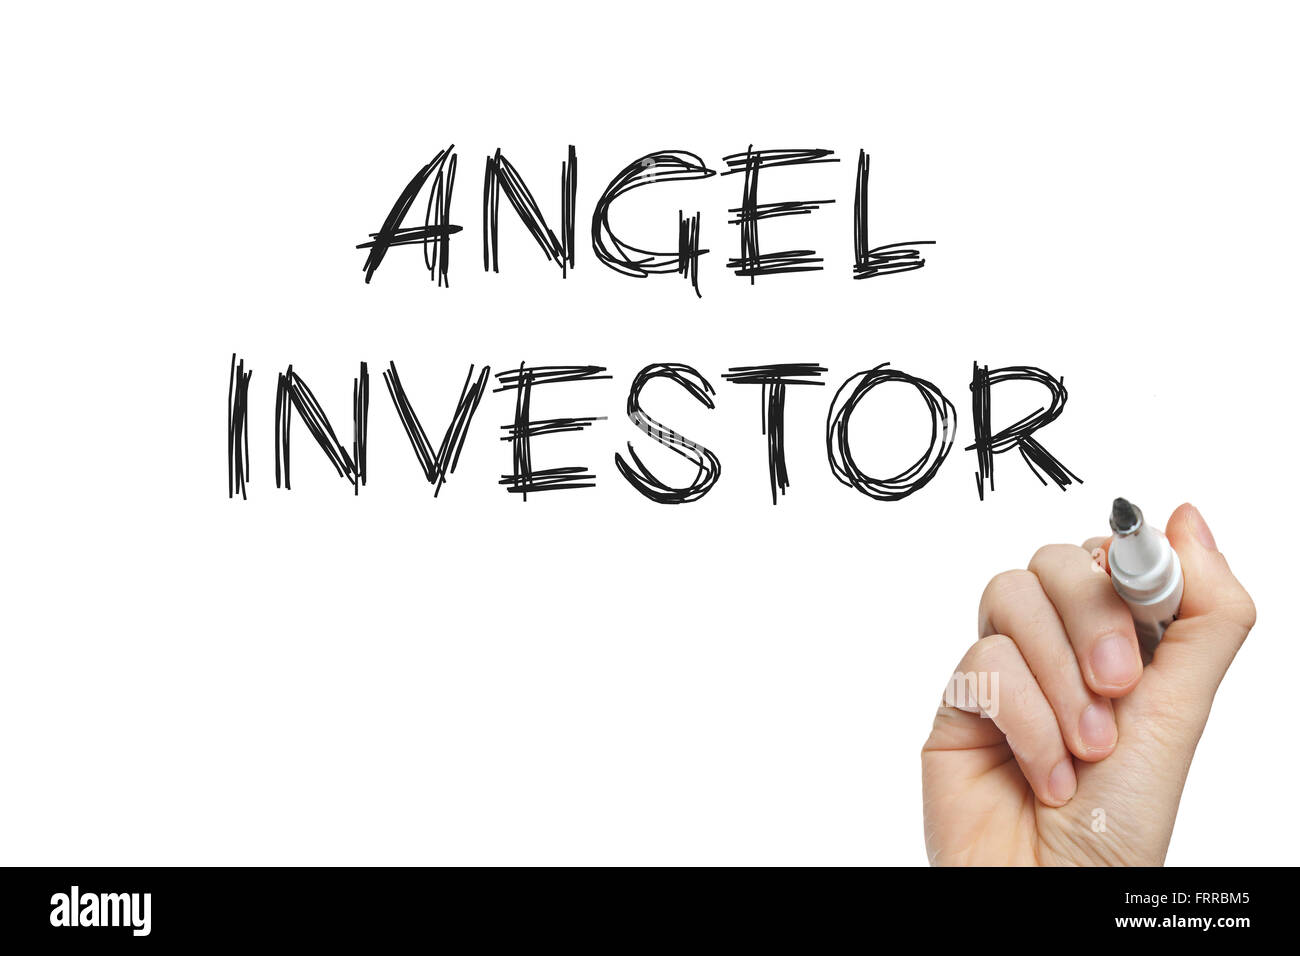 Hand writing angel investor on a white board Stock Photo